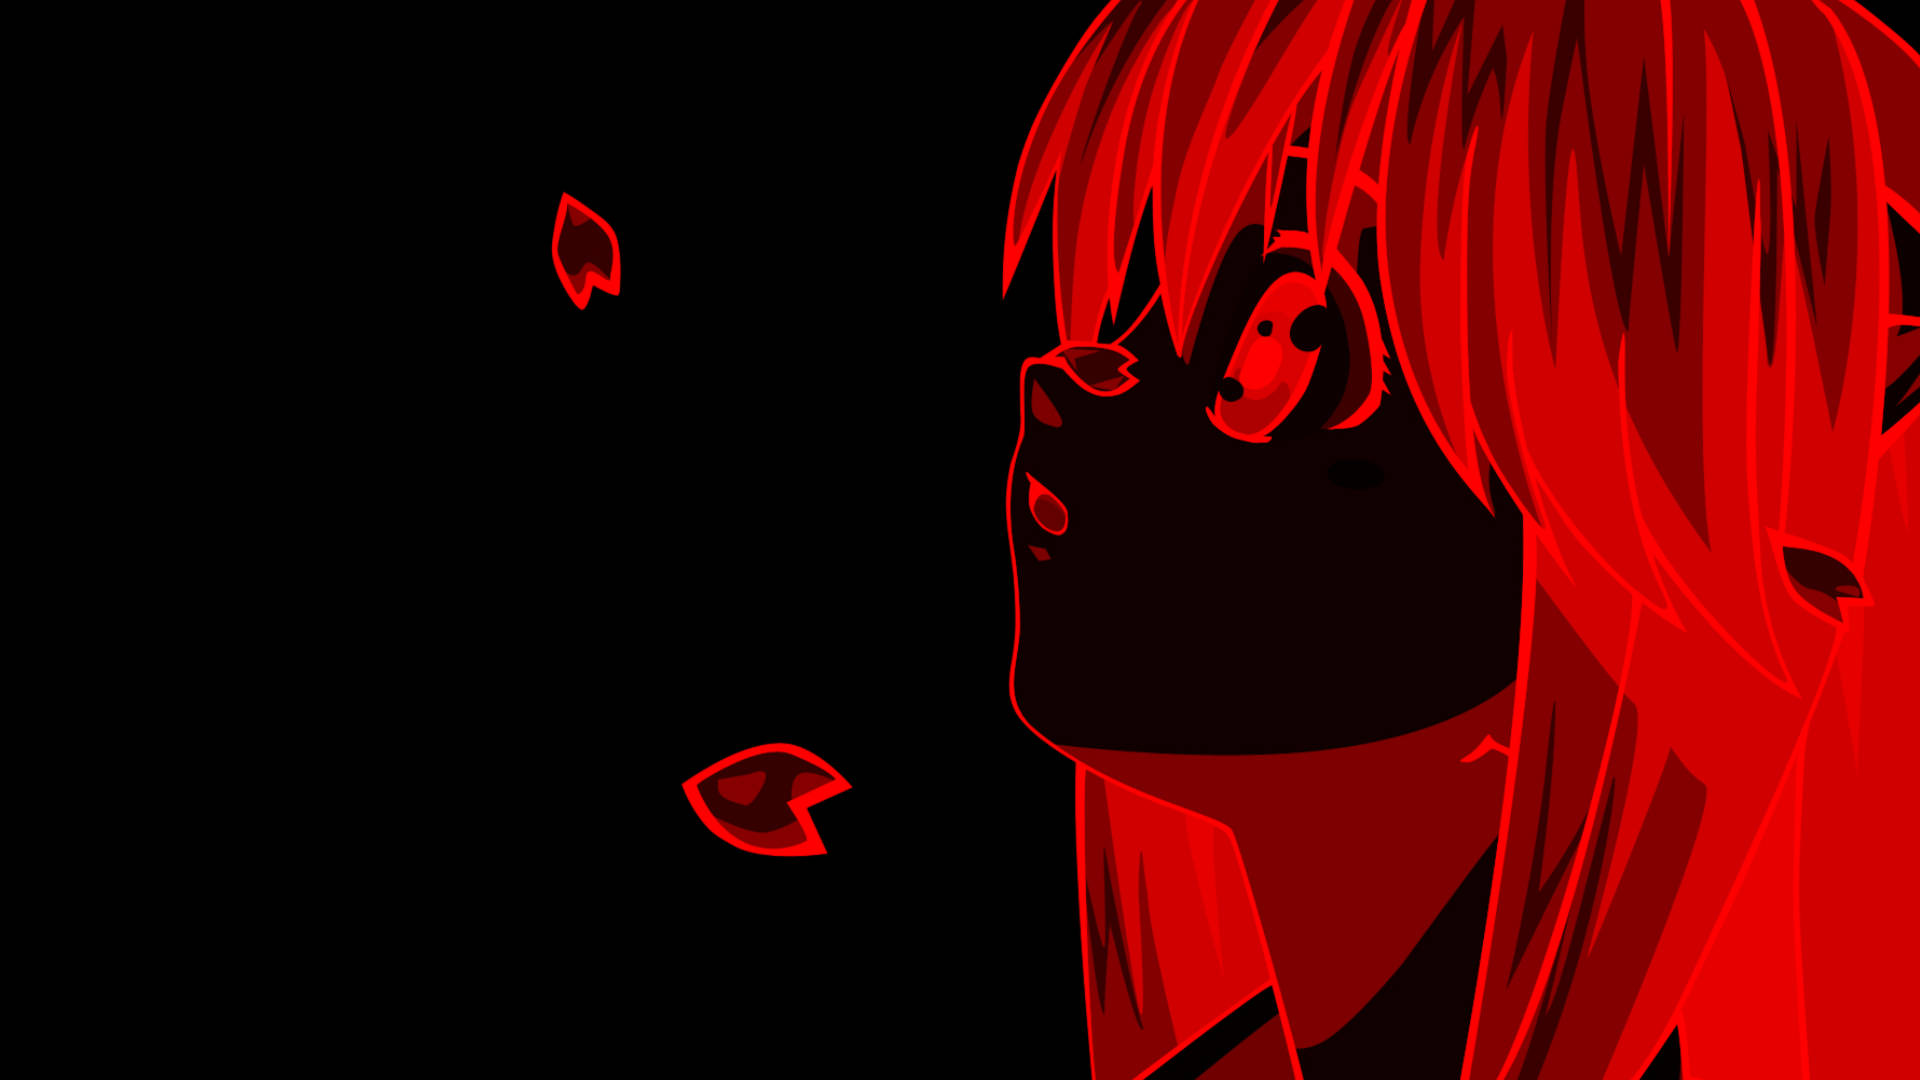 Elfen Lied Lucy On Red Filter Wallpaper